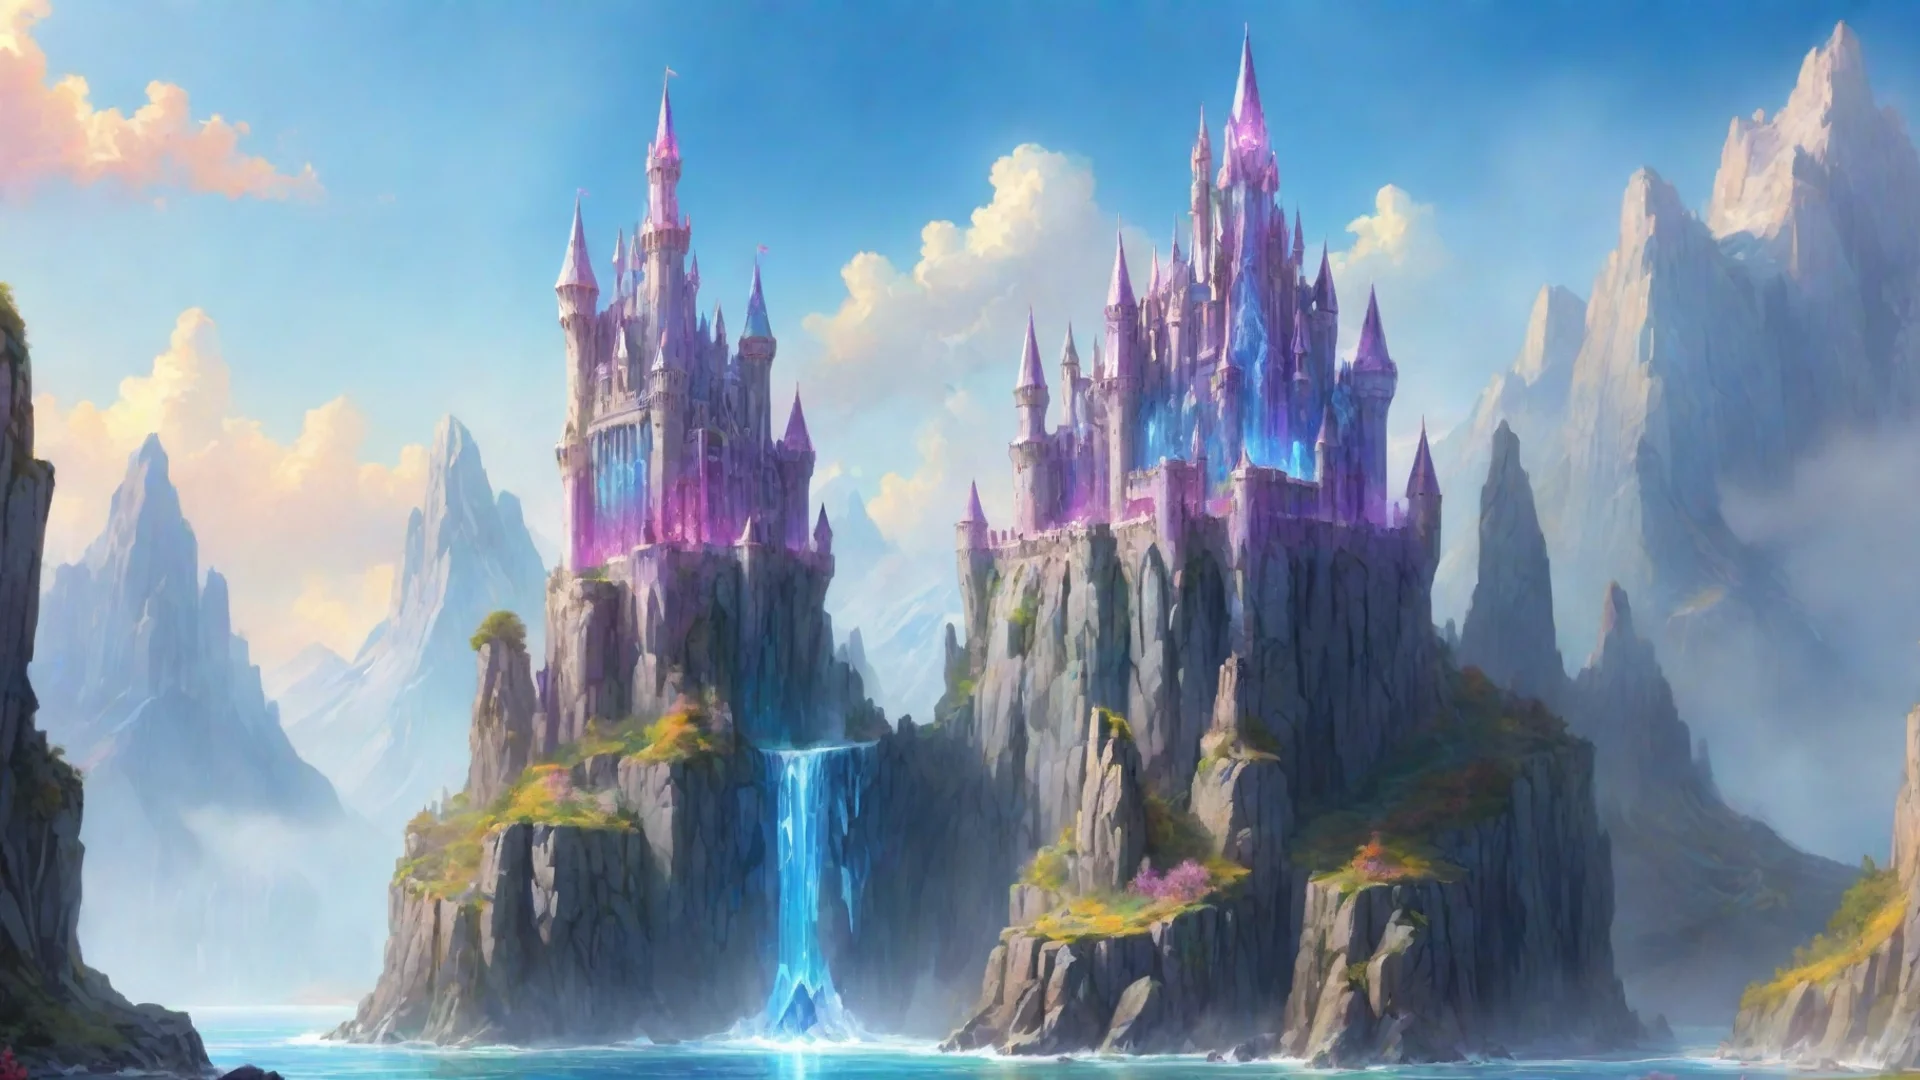 amazing castle fantasy landscape with giant crystal build on giant crystal cliffs bright colors awesome portrait 2 wide